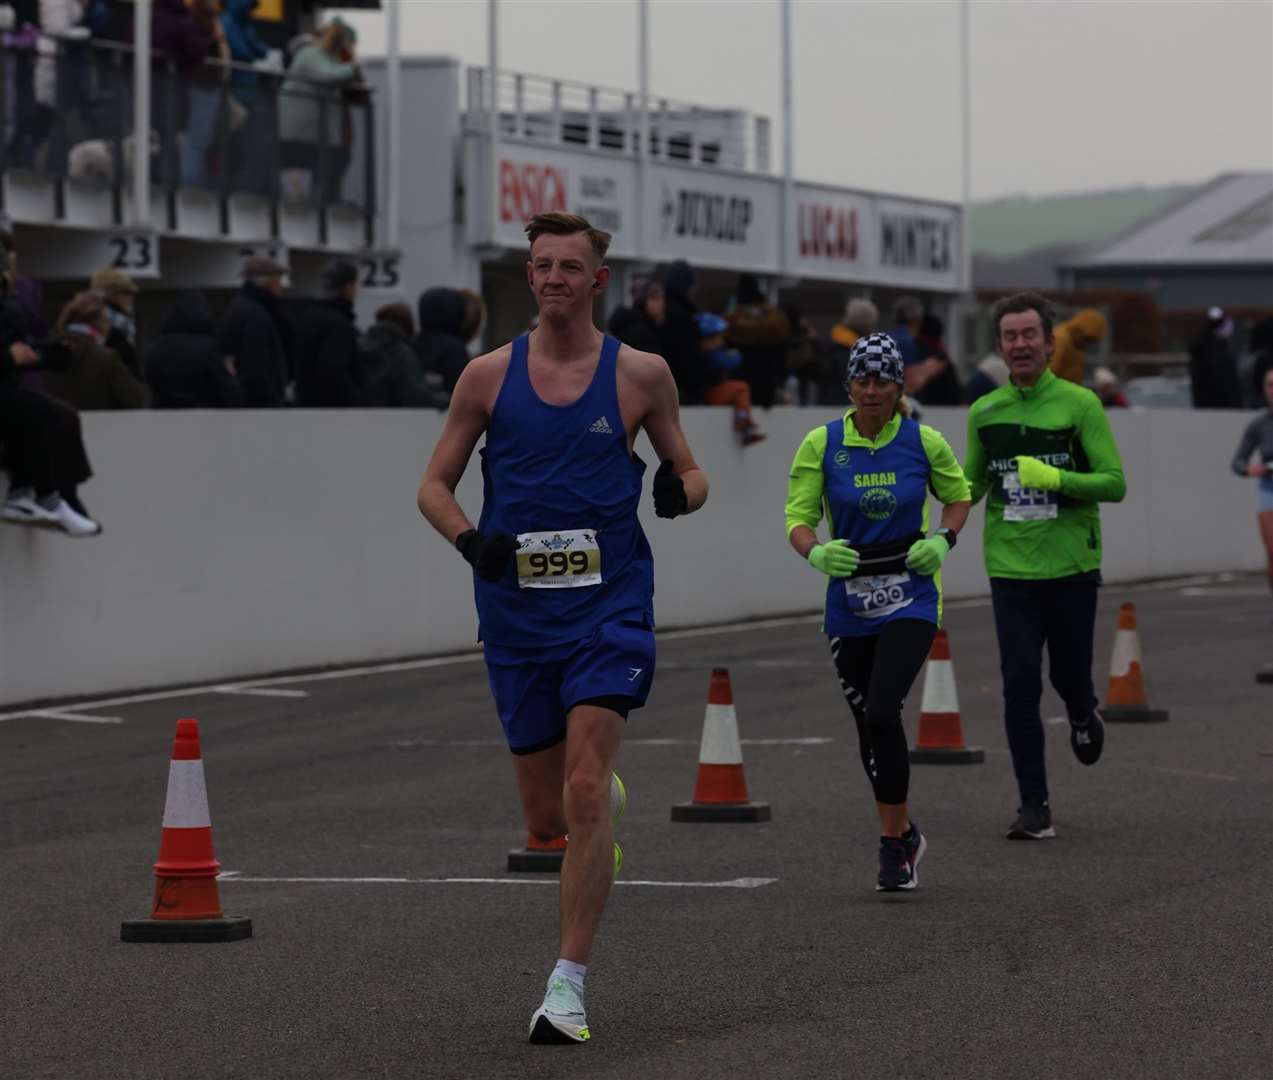 Chris raced in marathons including London, Brighton, Manchester and Goodwood this year